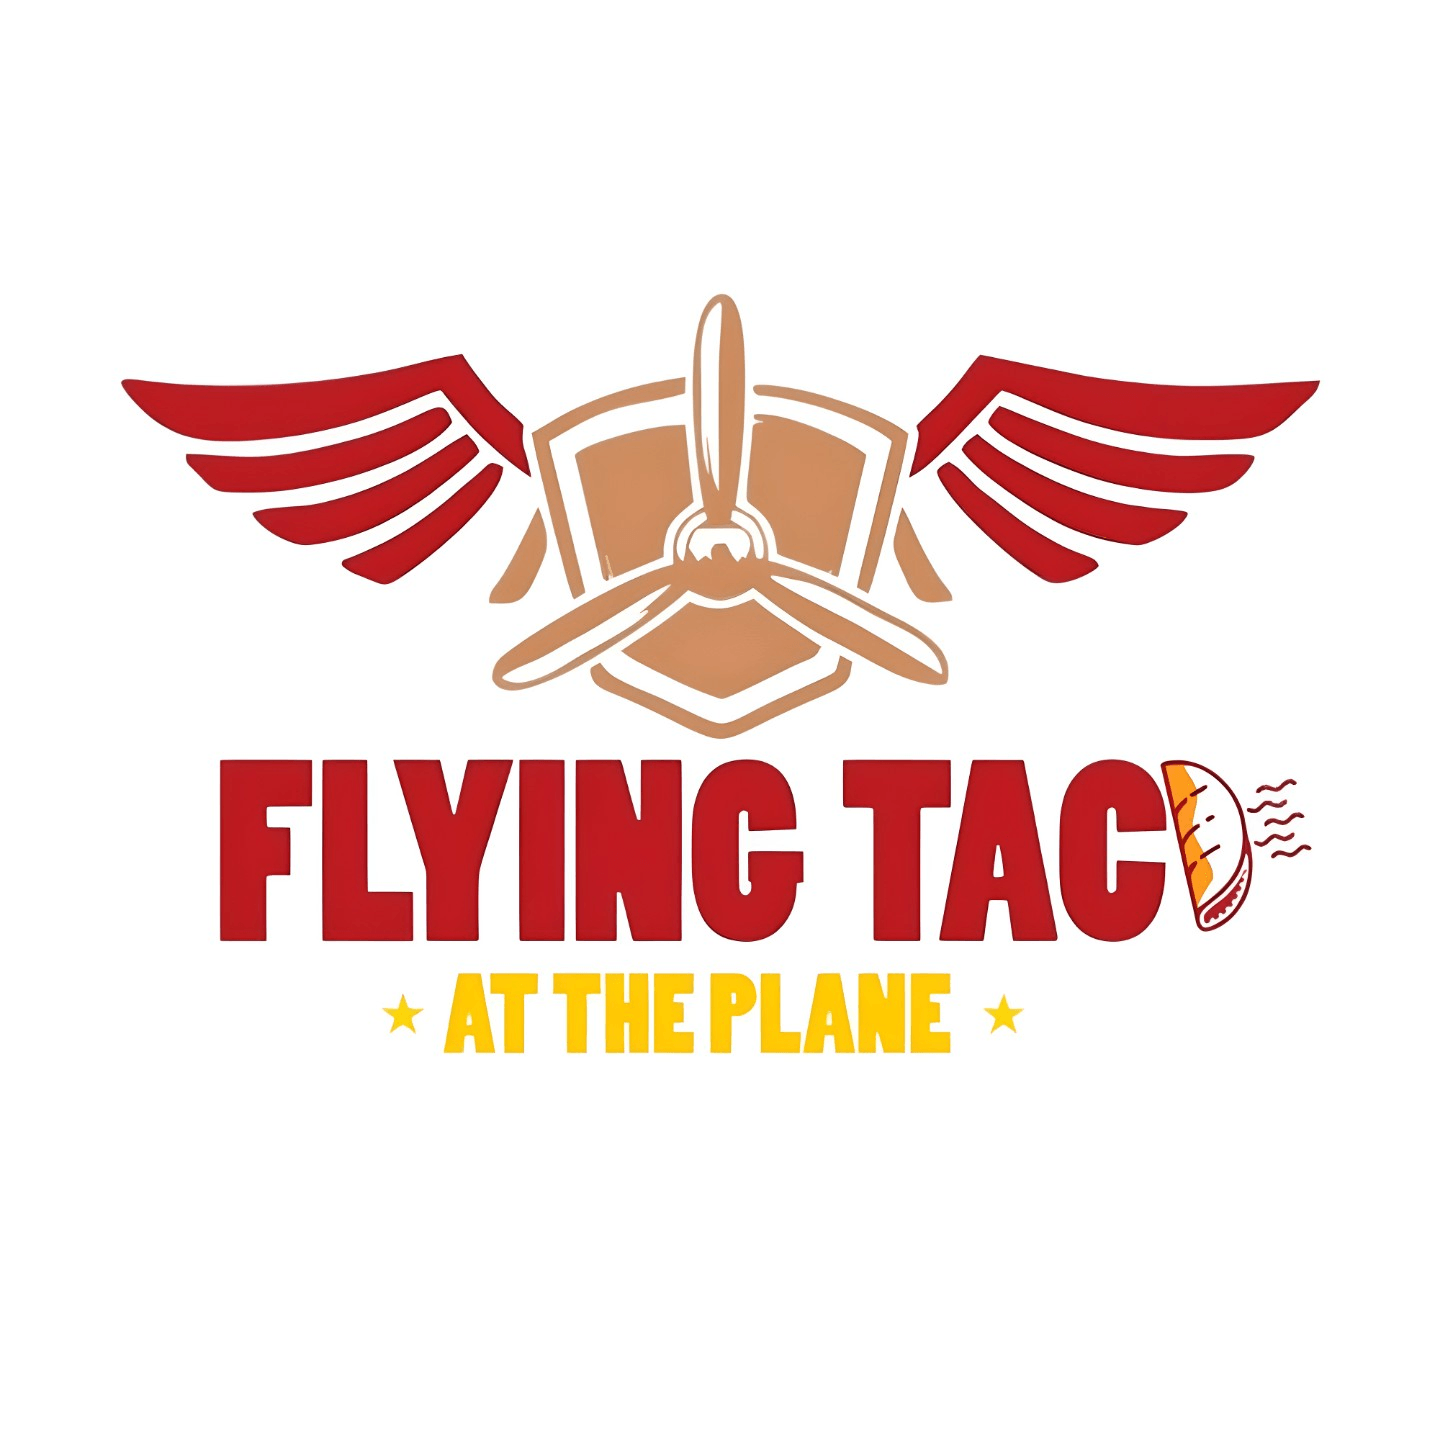 Welcome to Flying Taco!